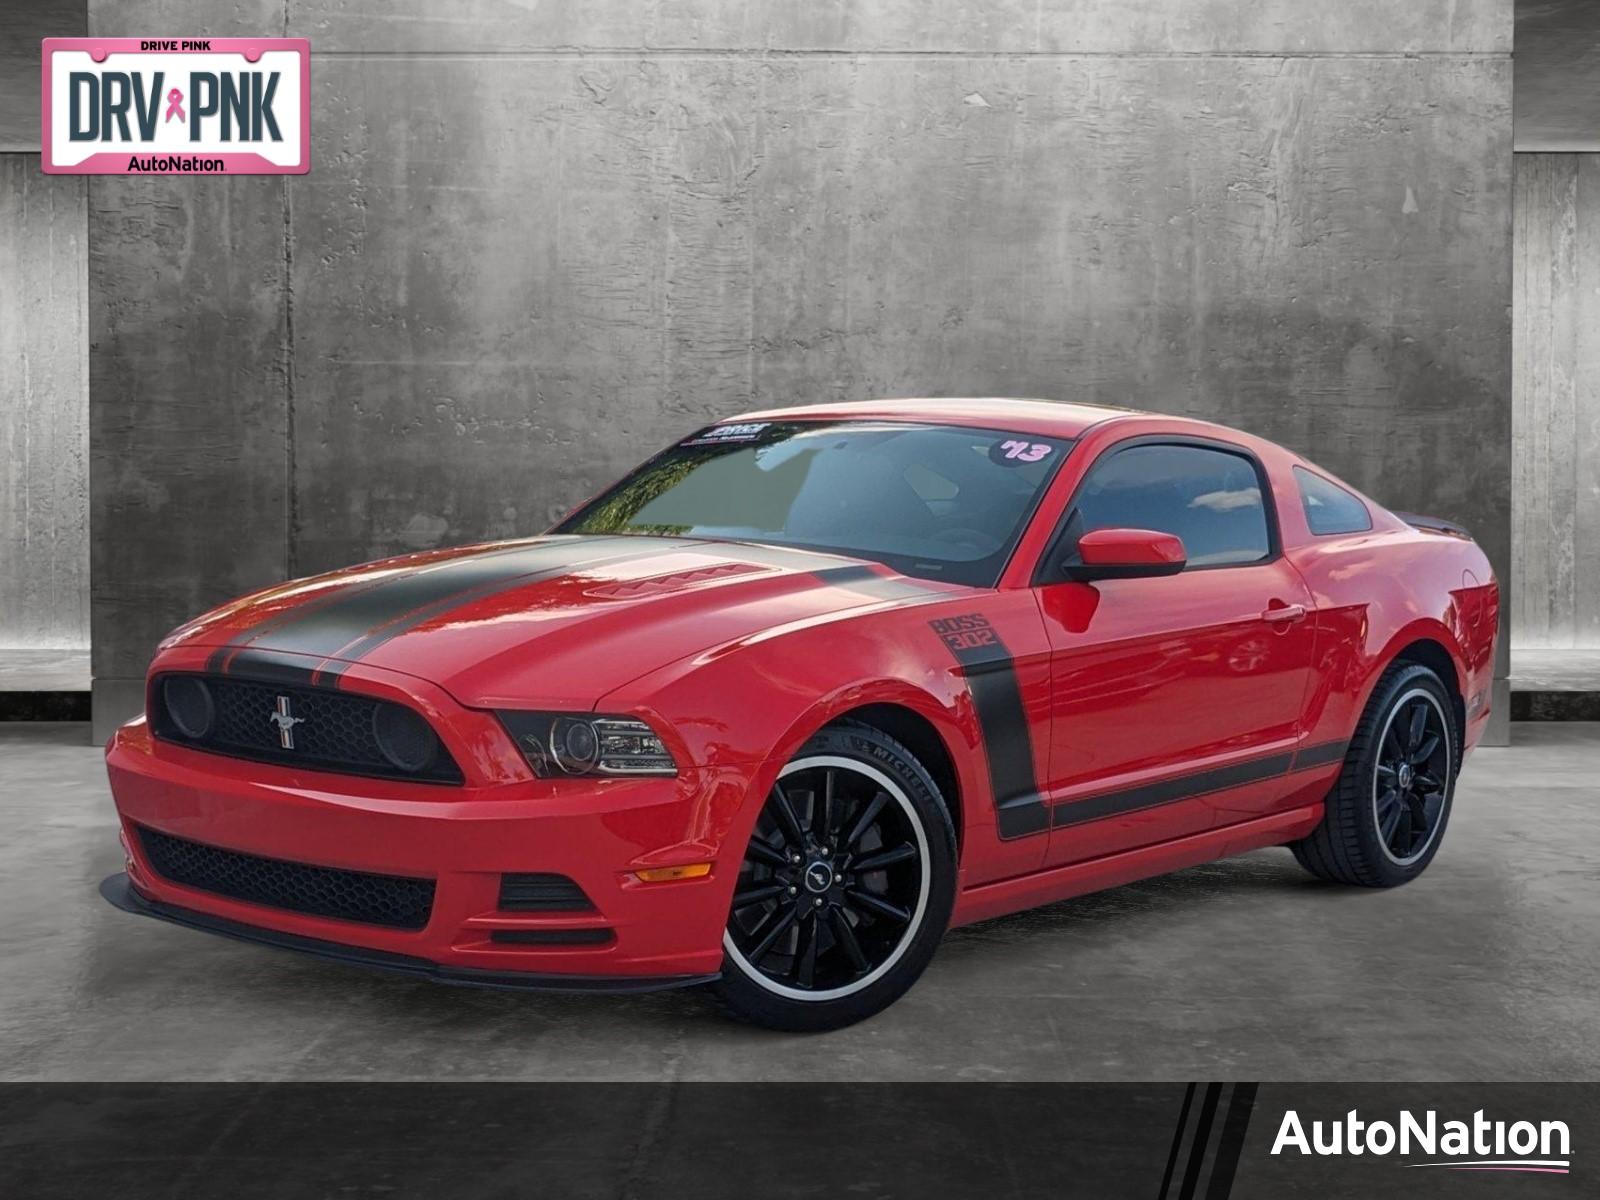 2013 Ford Mustang Vehicle Photo in Margate, FL 33063